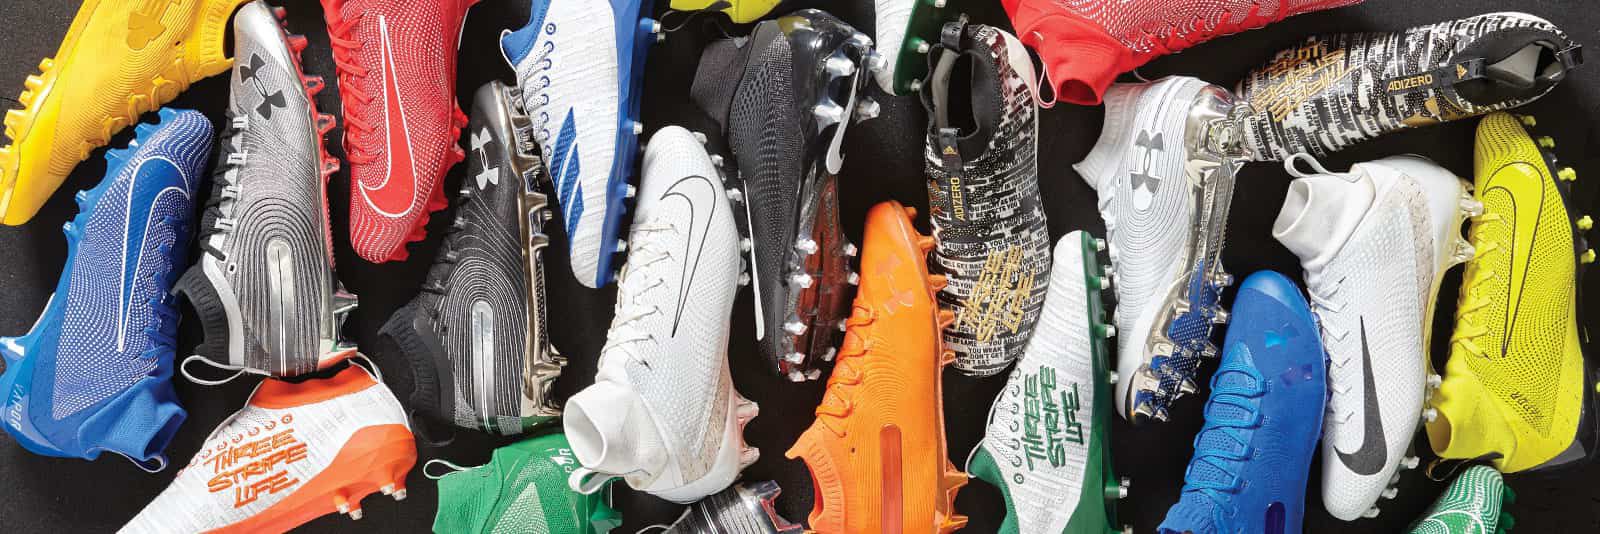 A collection of football gear including Nike Cleats, Under Armour Gloves, a Wilson NFL football, & a Shock Doctor lip guard in a variety of colors.